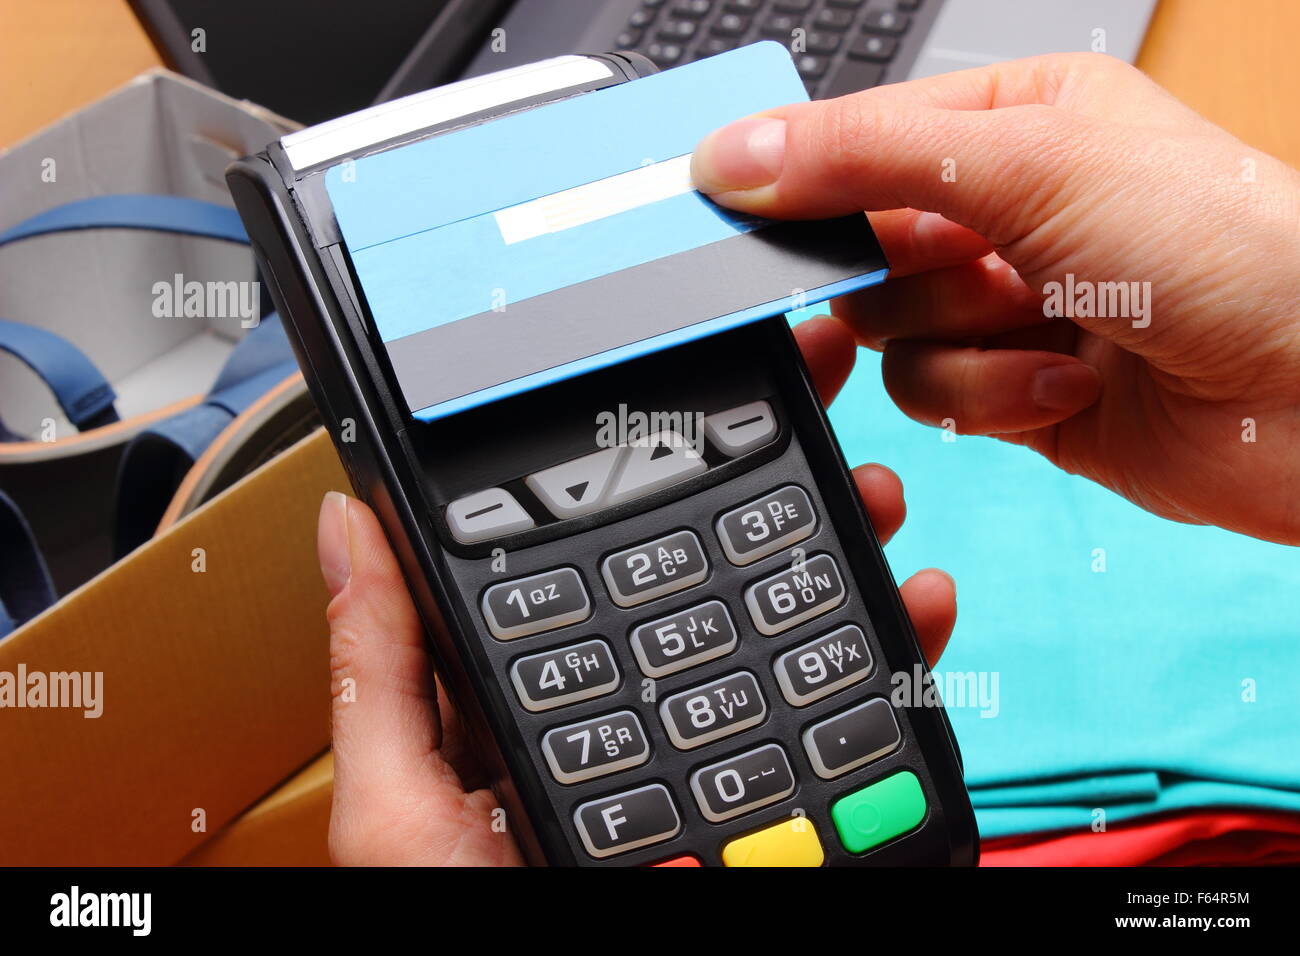 Use Payment Terminal And Contactless Credit Card With Nfc Technology For Paying For Purchases In Store Credit Card Reader Stock Photo Alamy